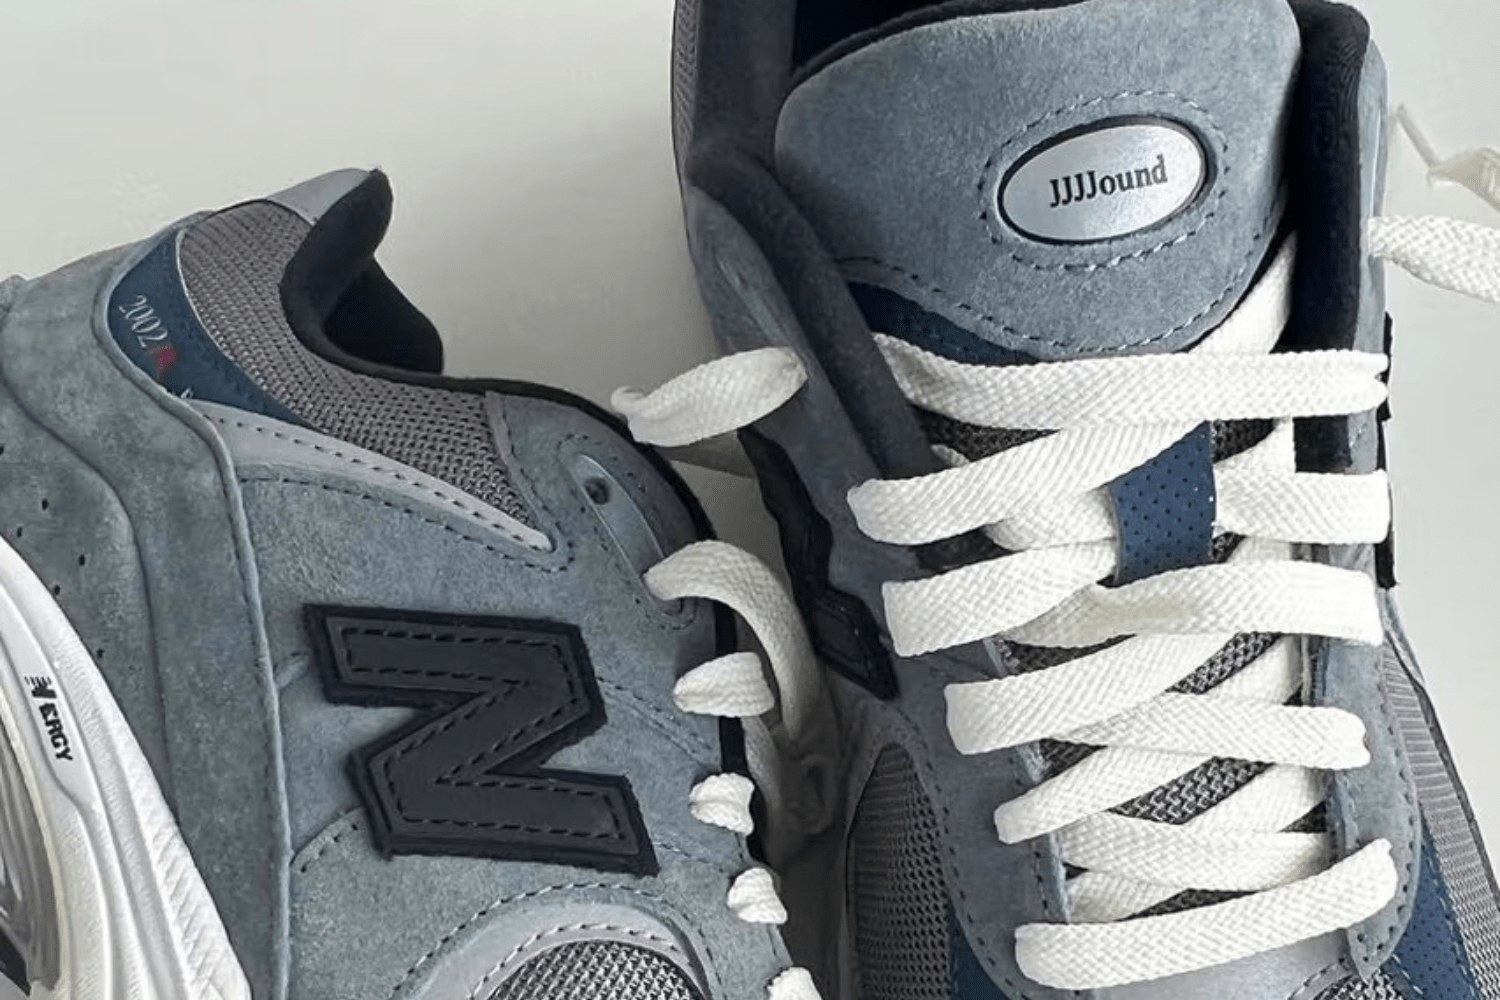 JJJJound reunites with New Balance for a 2002R collab